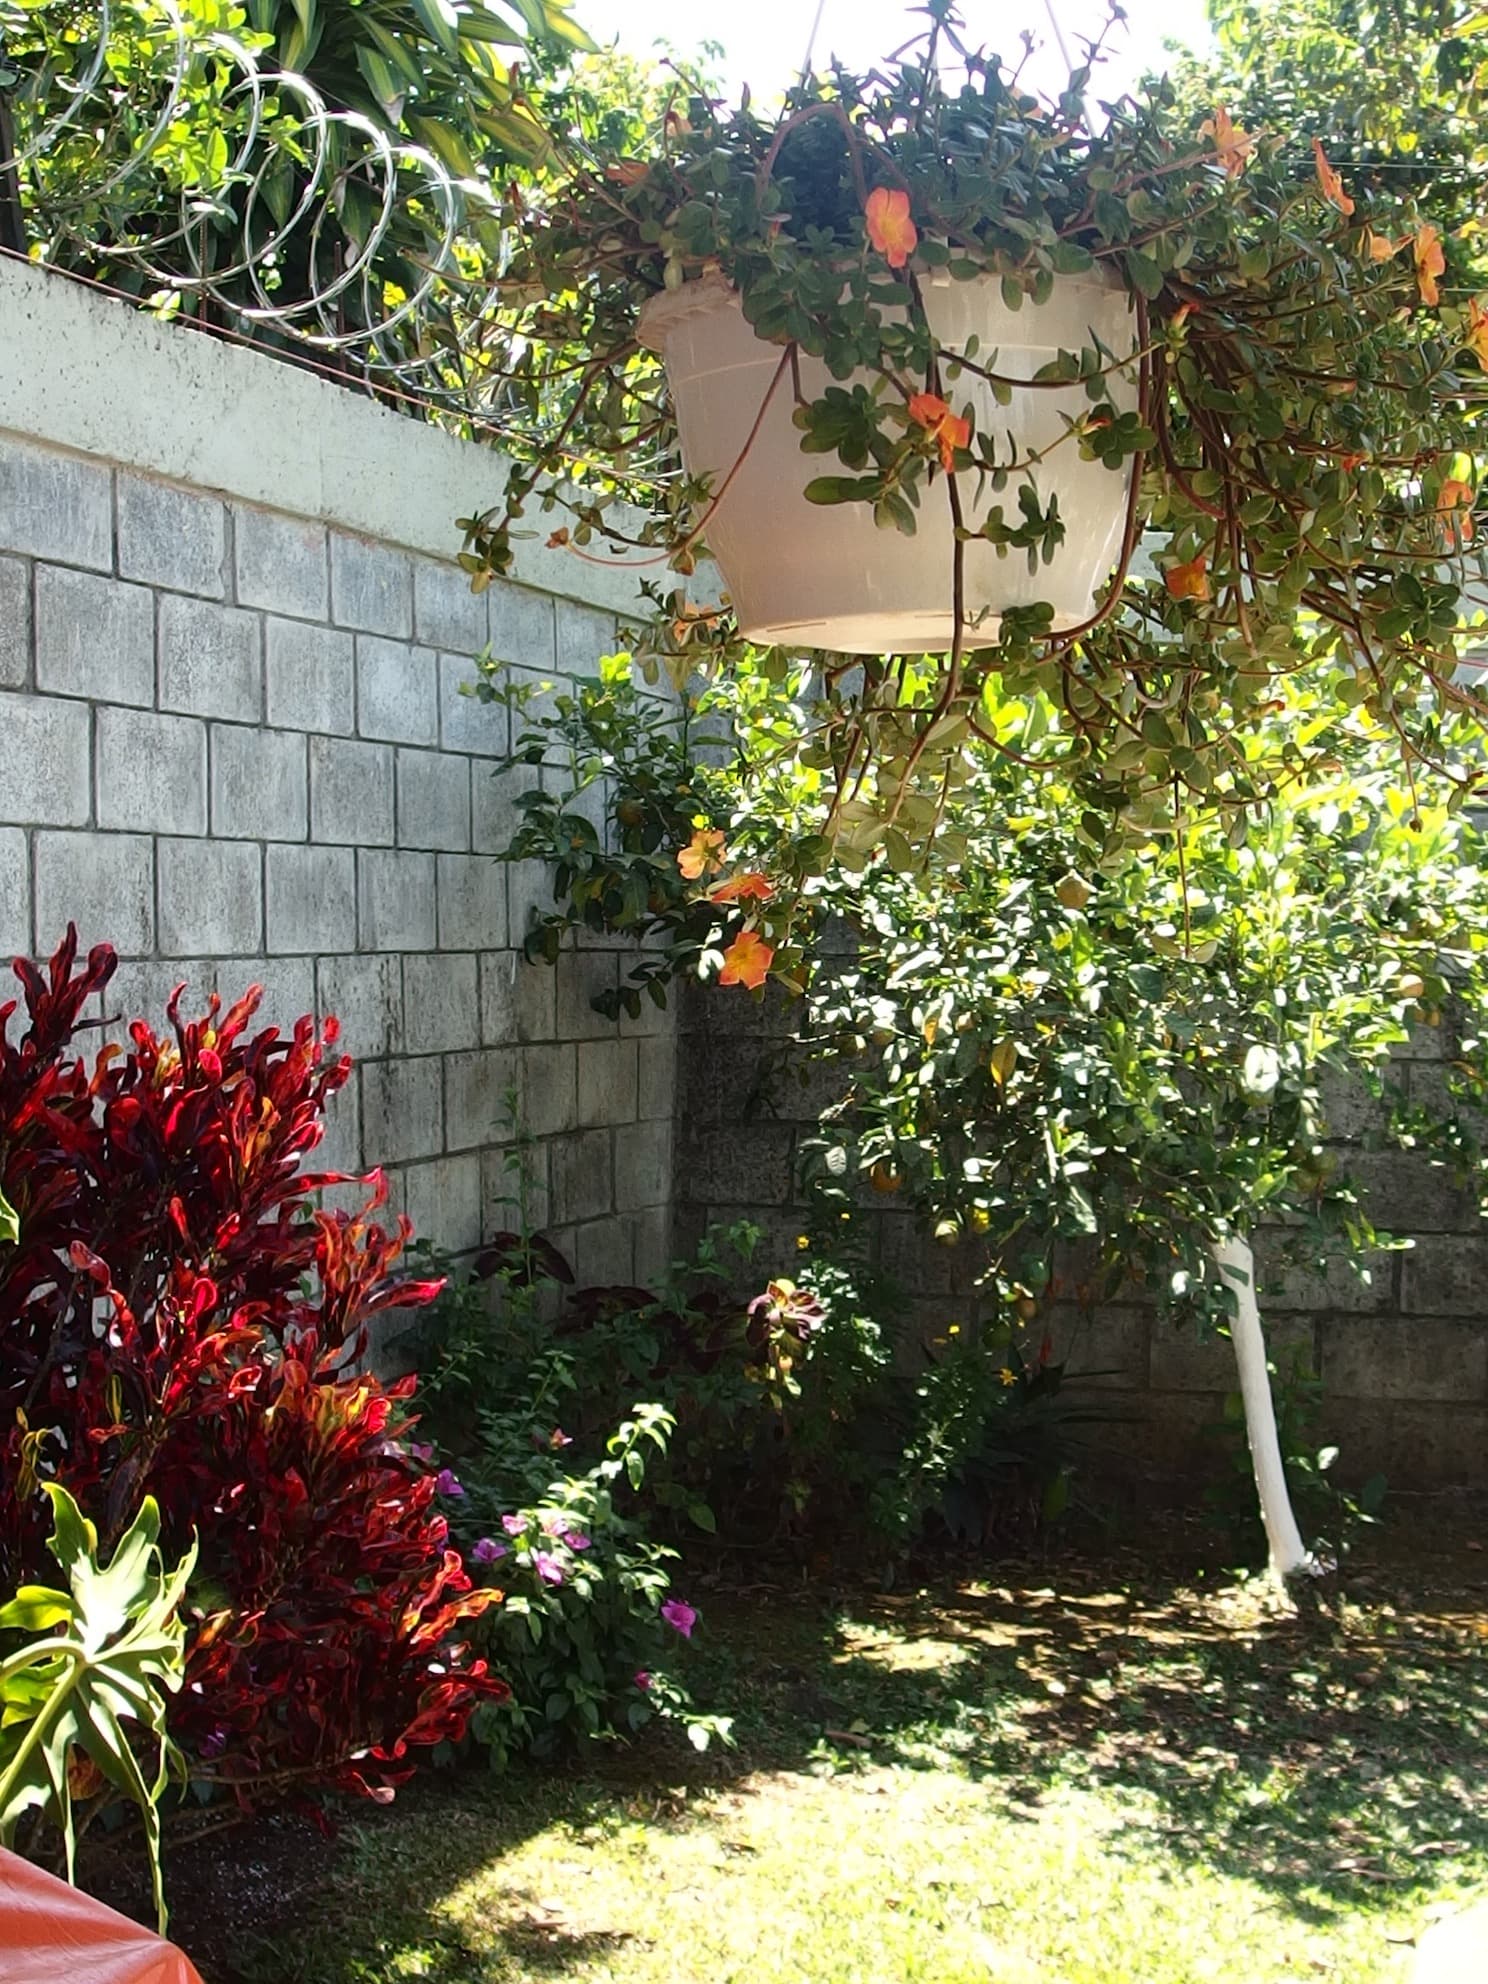 Only 155,000USD! house for sale palmares costa rica